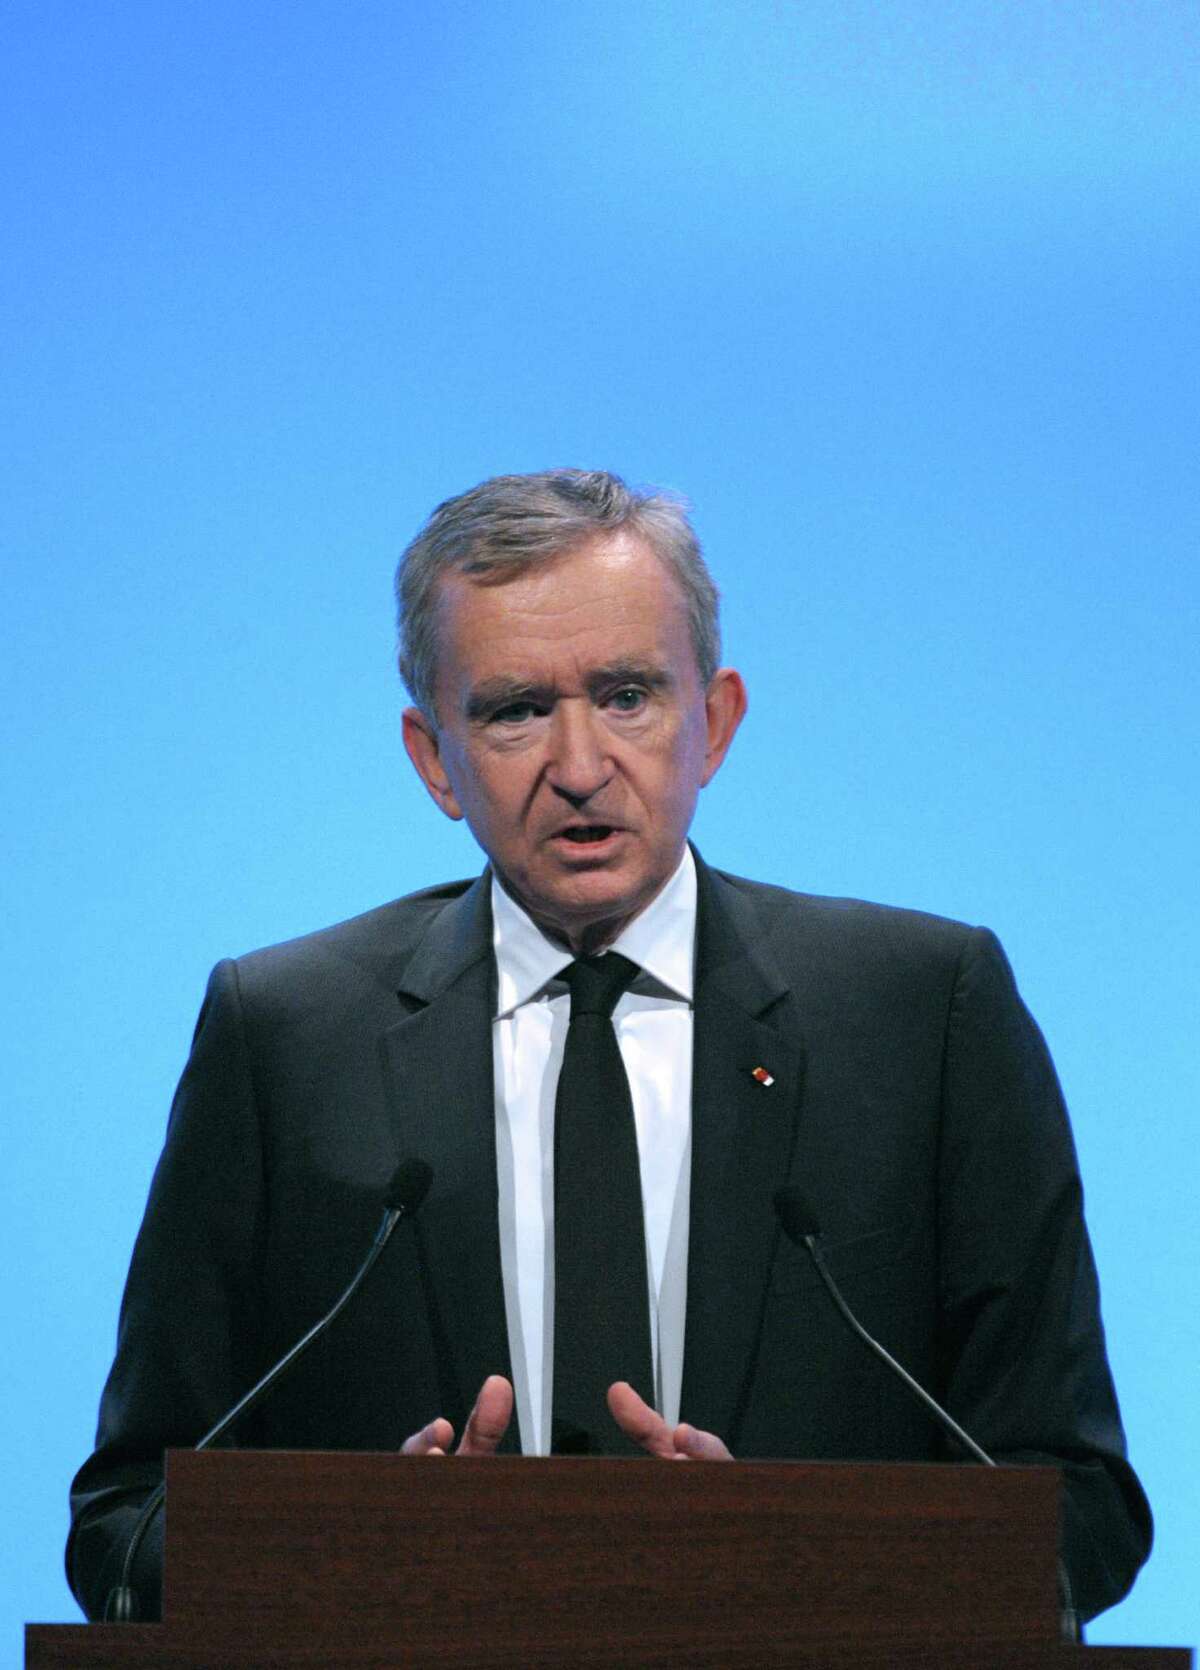 CORRECTION -- (FILES) This photo taken on January 31, 2013 shows Luxury group LVMH CEO Bernard Arnault presenting the group's 2012 annual results at company headquarters in Paris. Arnault has renounced his demand for Belgian citizenship, according to an interview in French daily newspaper Le Monde on April 10, 2013. AFP PHOTO / FRANCOIS GUILLOTERIC PIERMONT/AFP/Getty Images